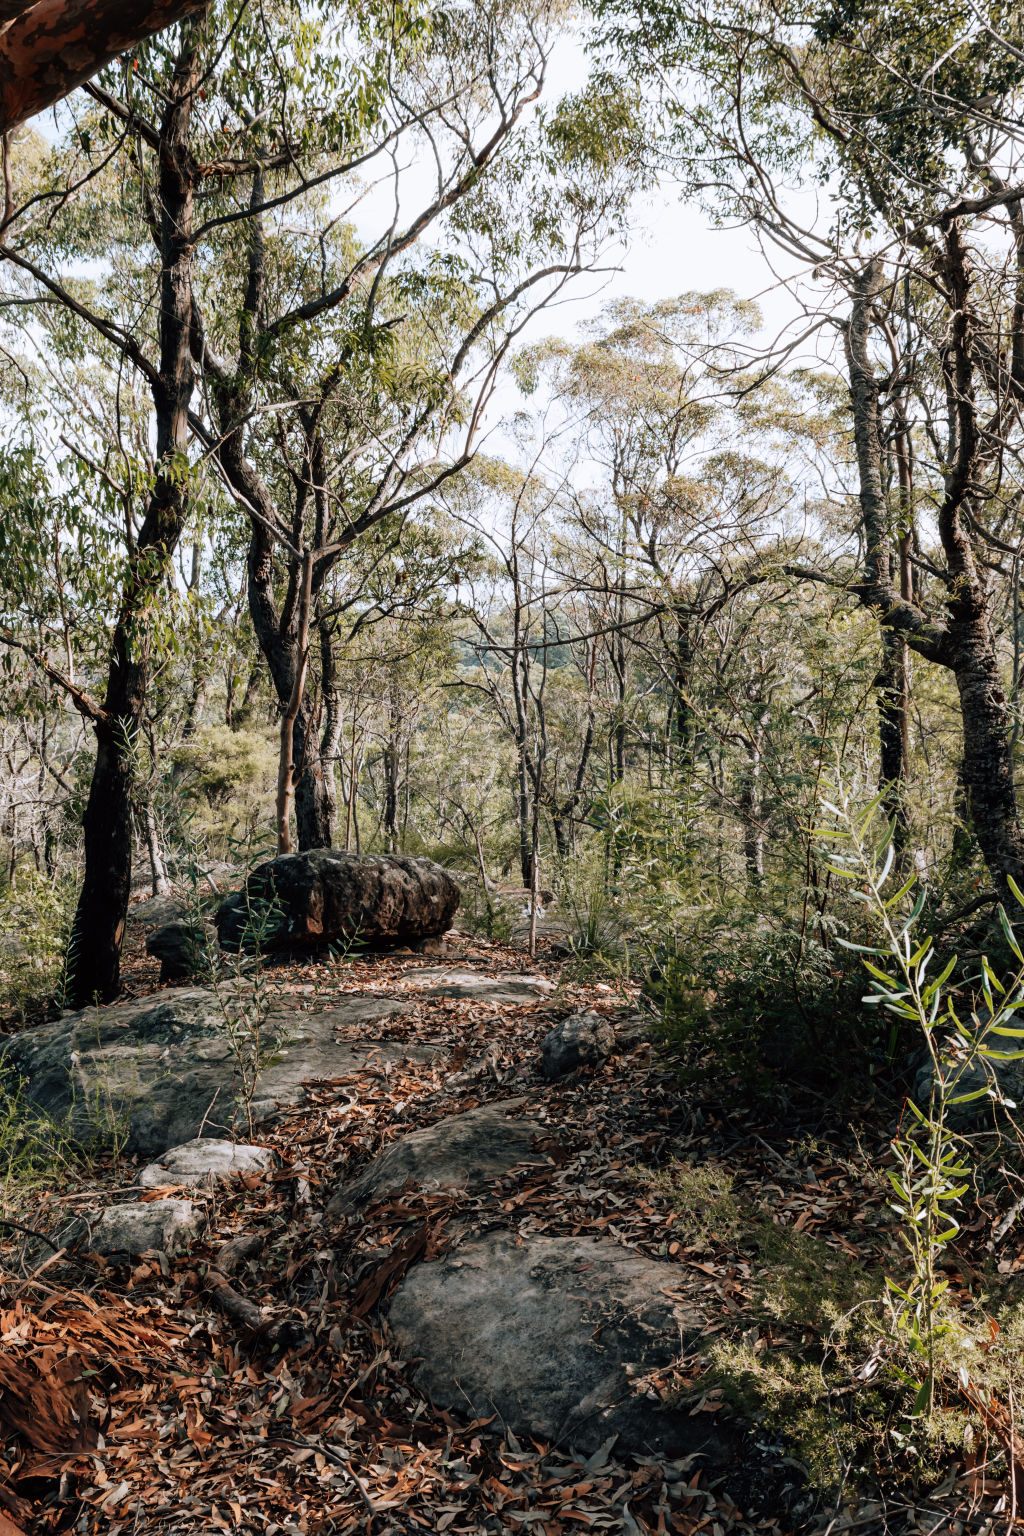 The natural surroundings of Springwood's Lawsons Lookout Track. Photo: Vaida Savickaite